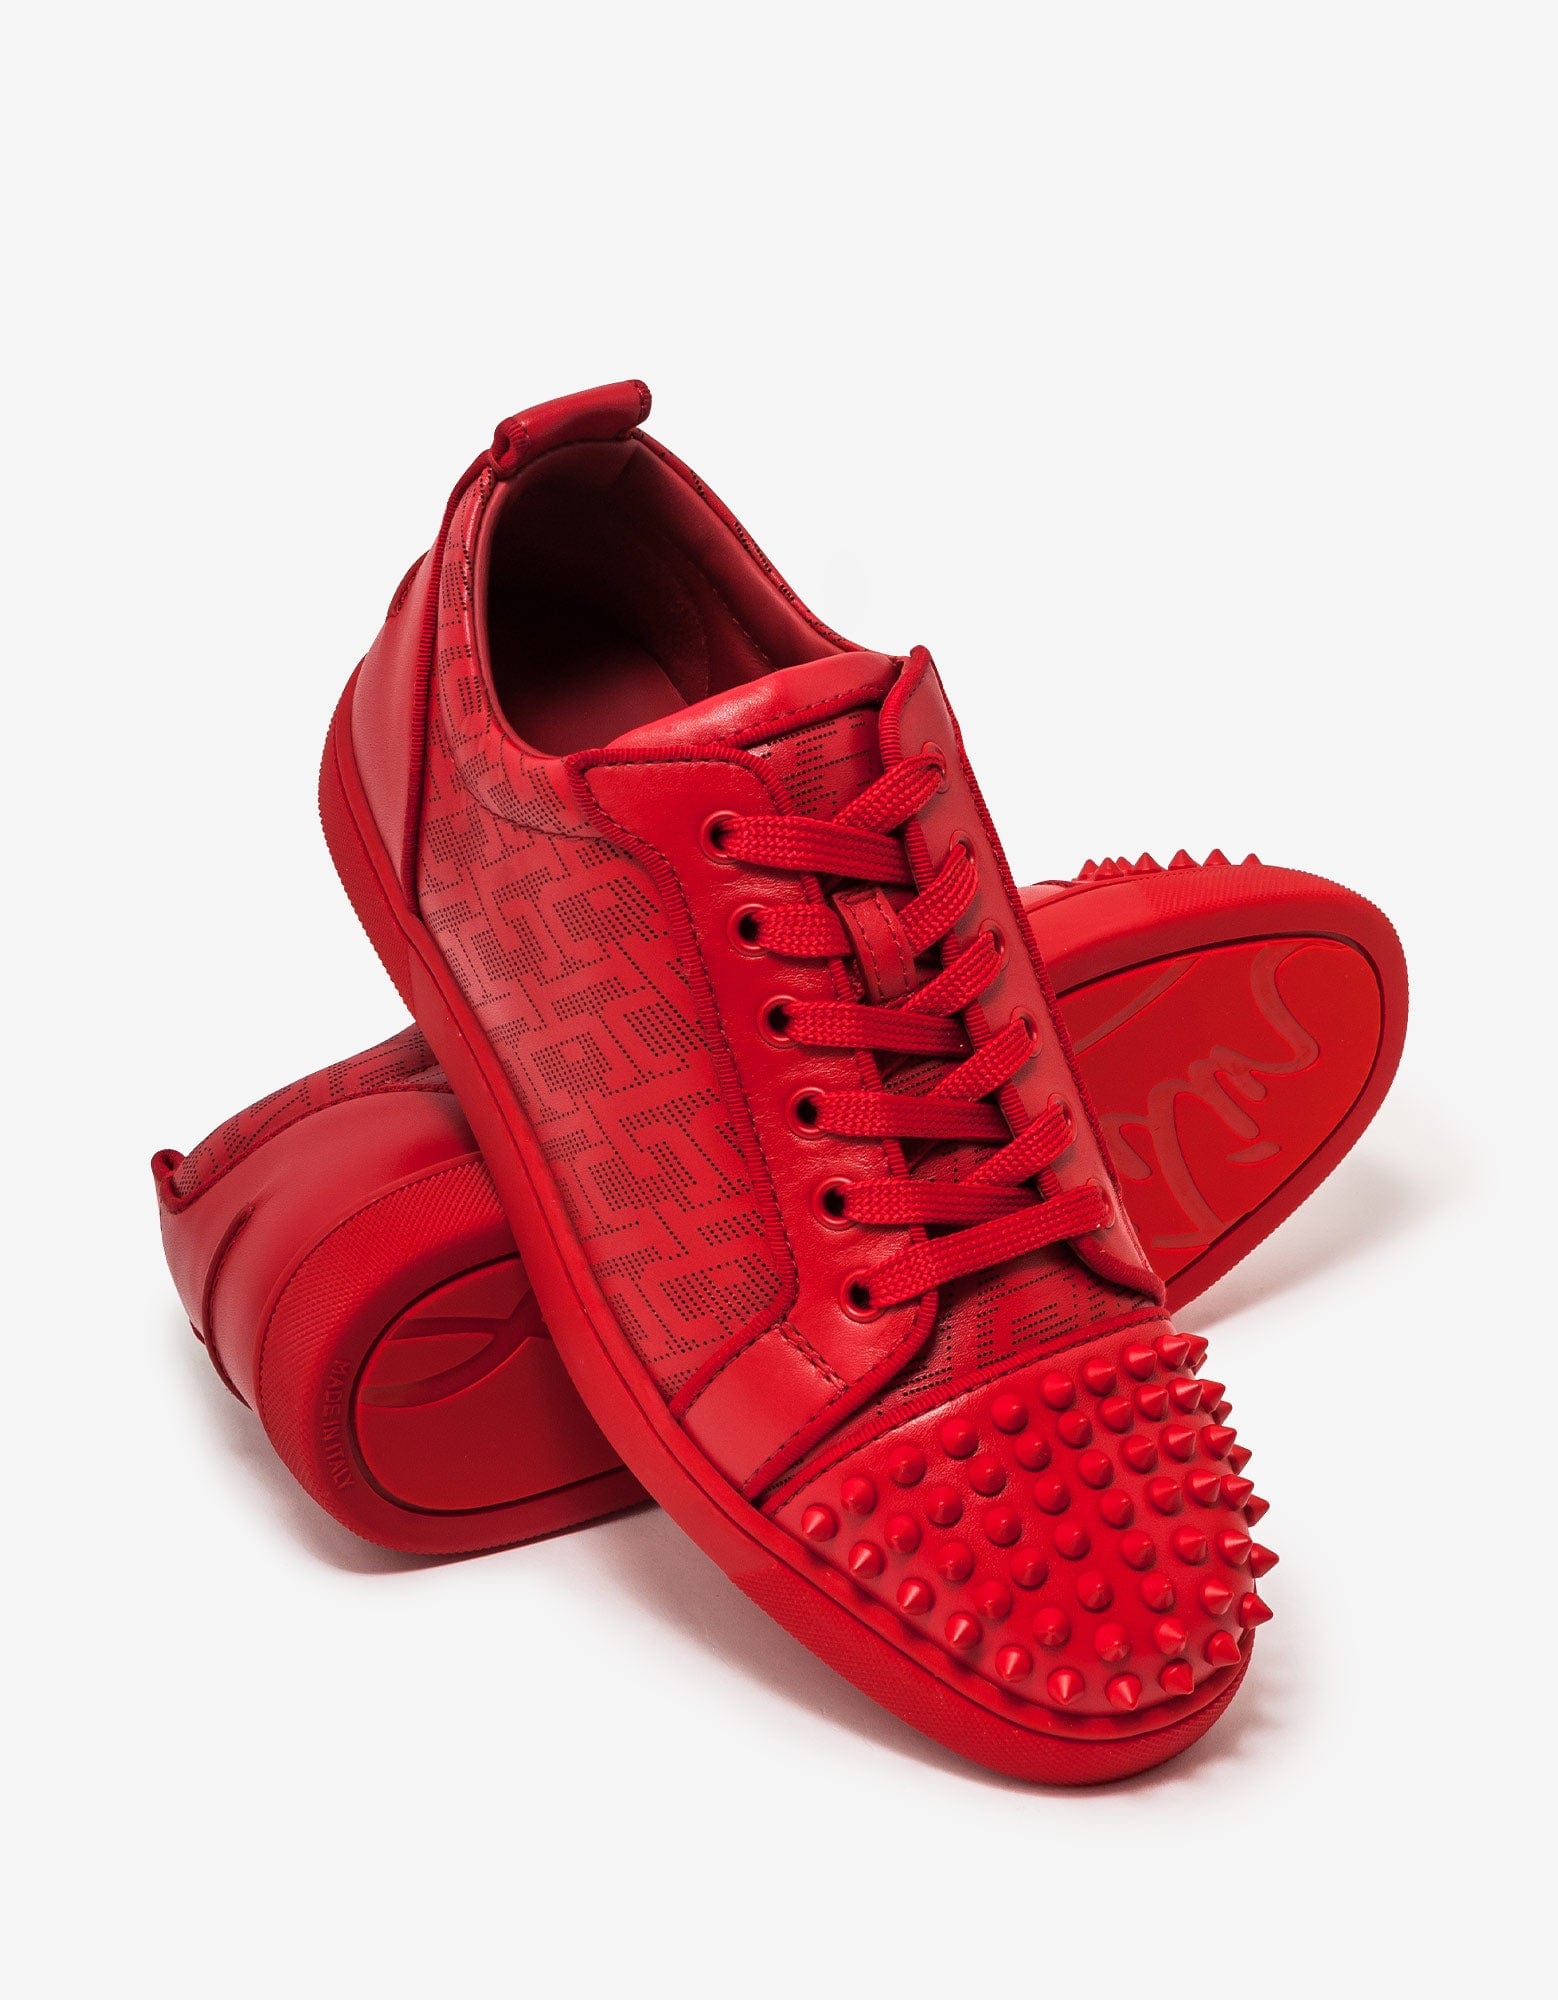 Mens Red Louboutin Sneakers Store | www.catholictradition.org